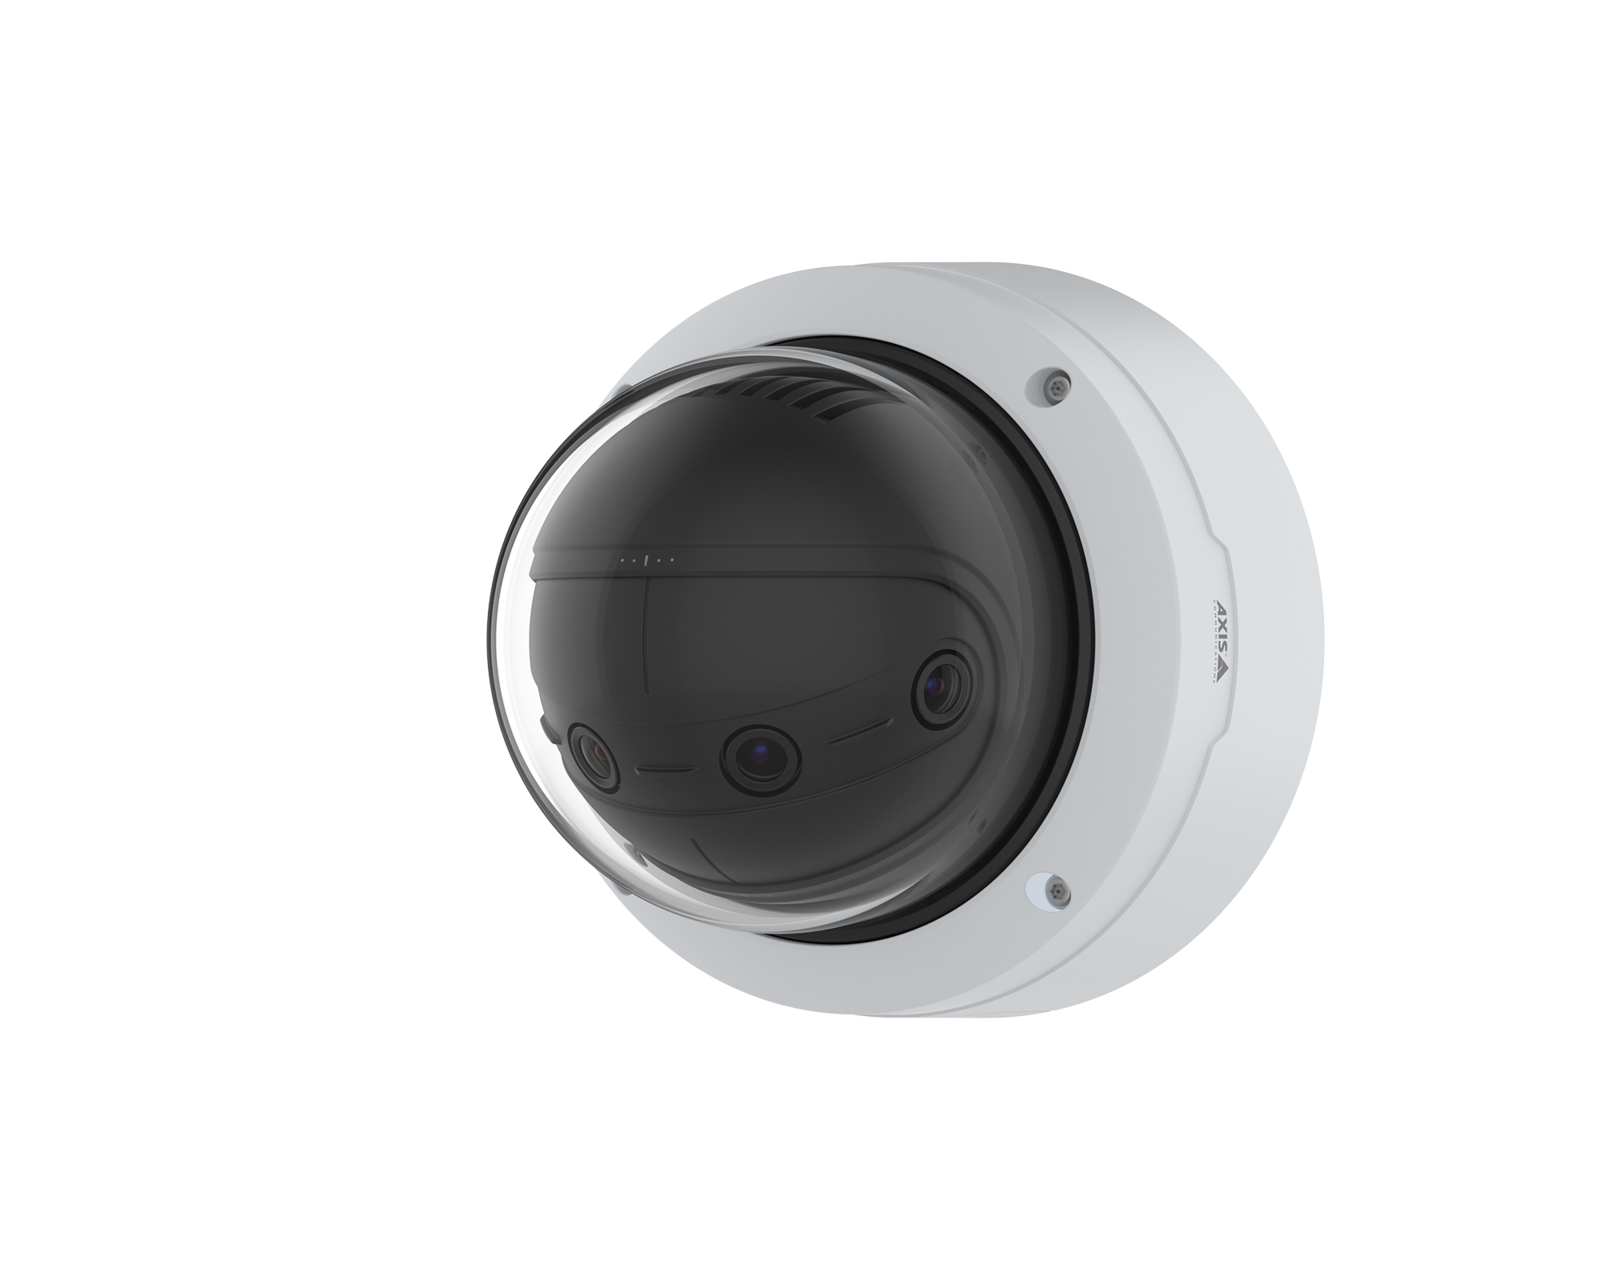 AXIS P3827-PVE Panoramic Camera | Axis Communications